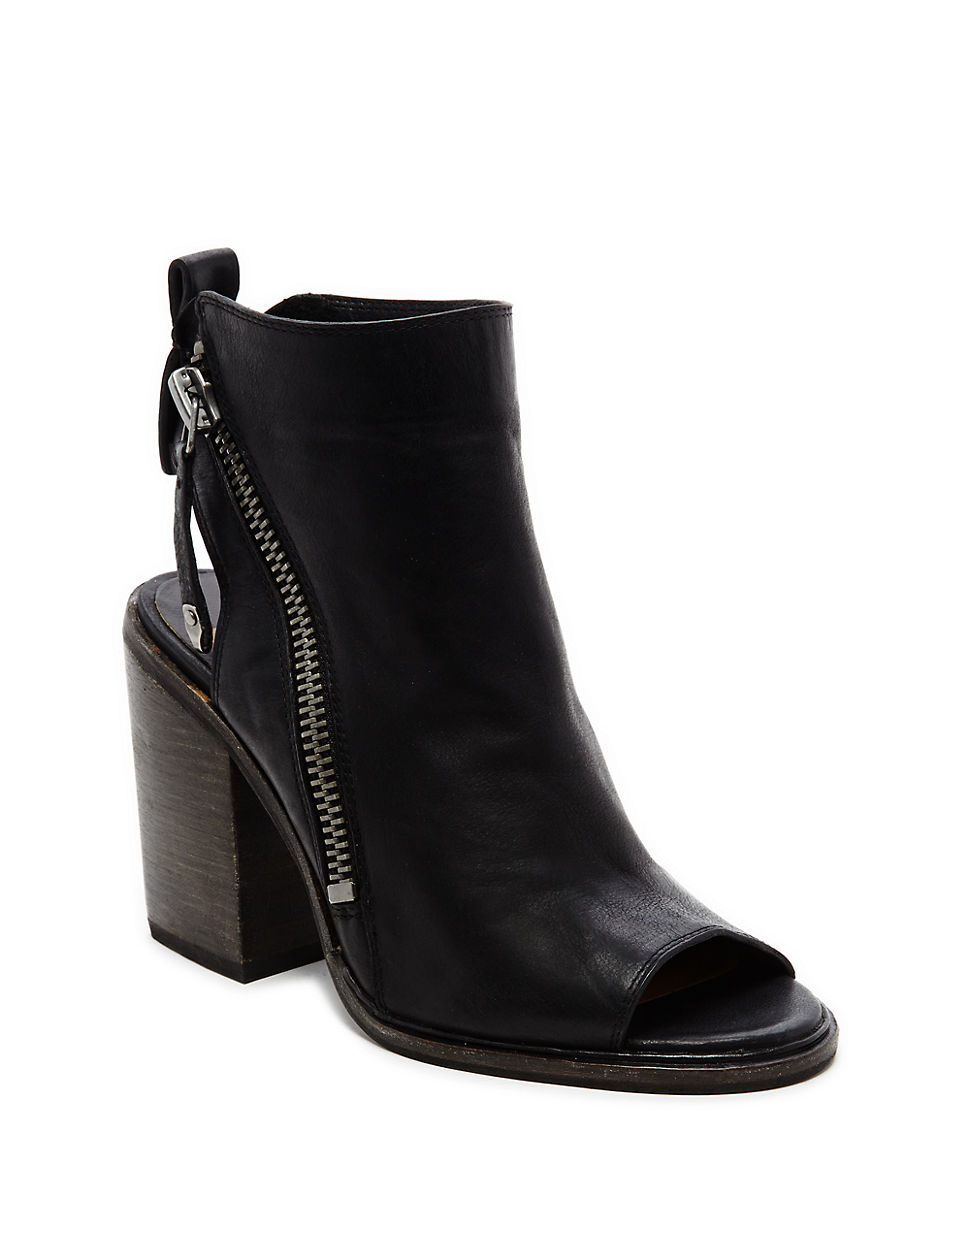 Dolce vita Port Leather Peep Toe Ankle Booties in Black | Lyst